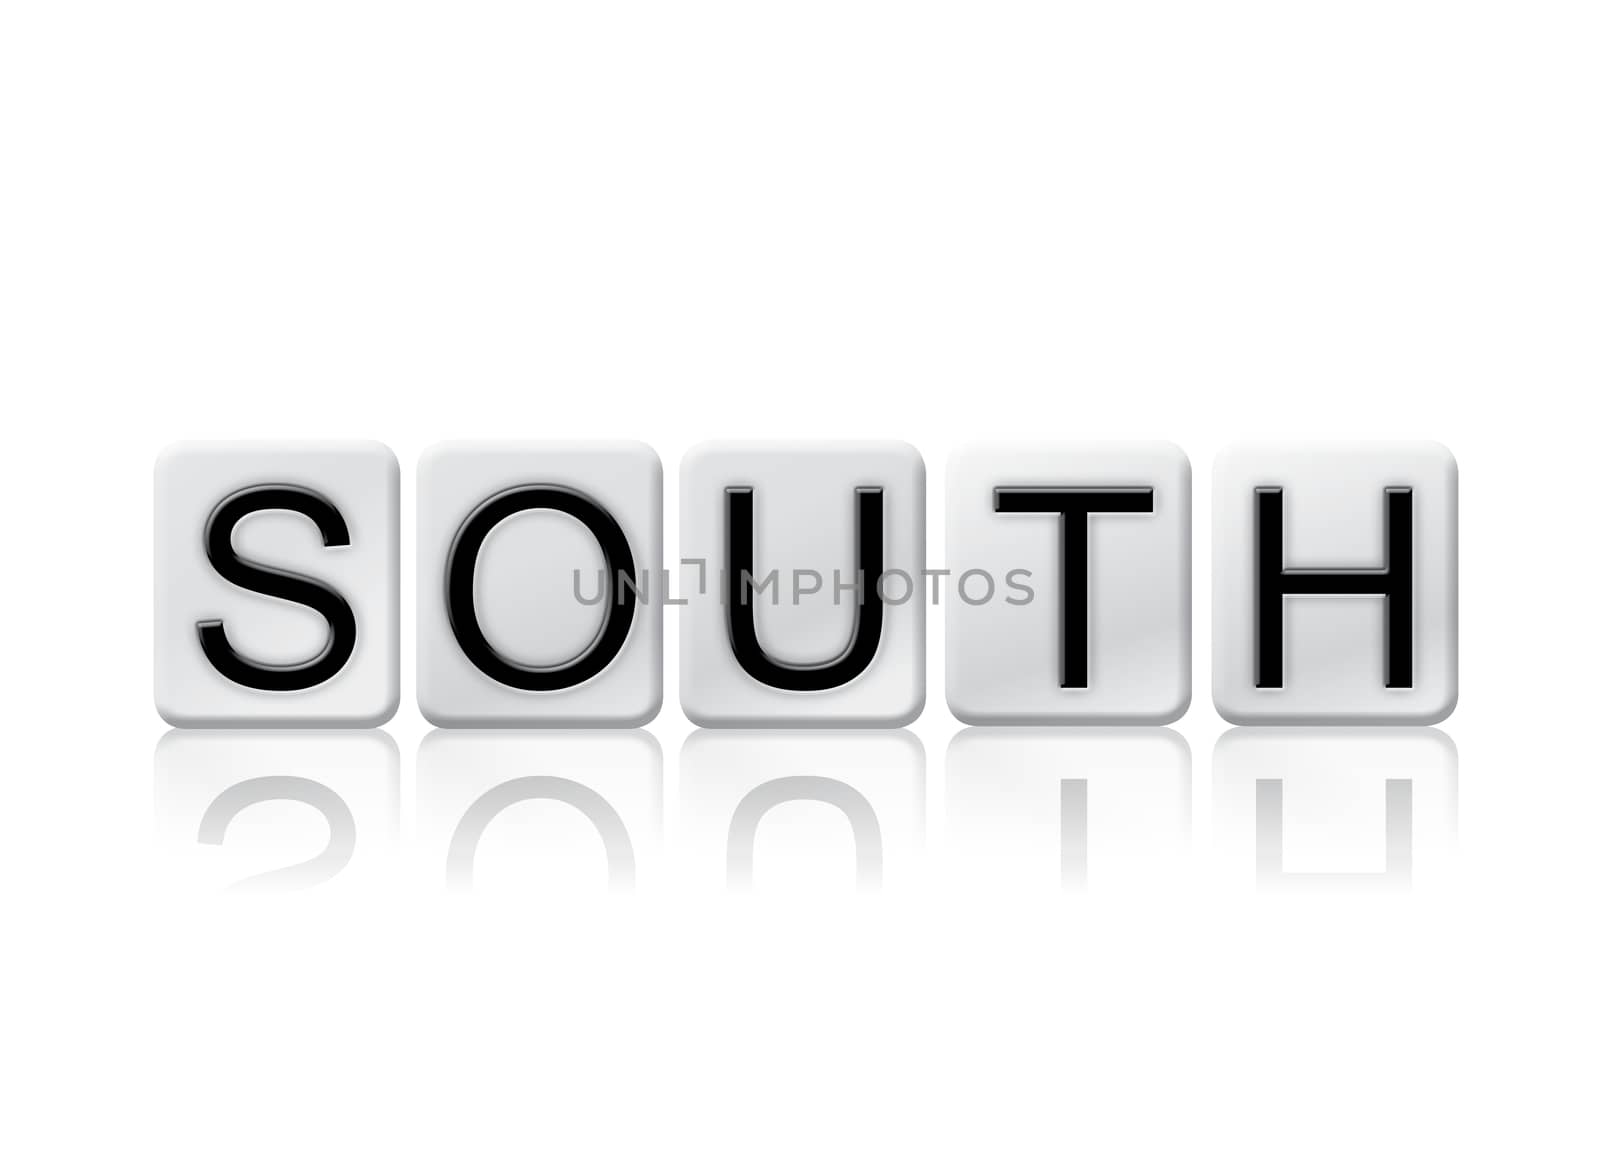 The word "South" written in tile letters isolated on a white background.